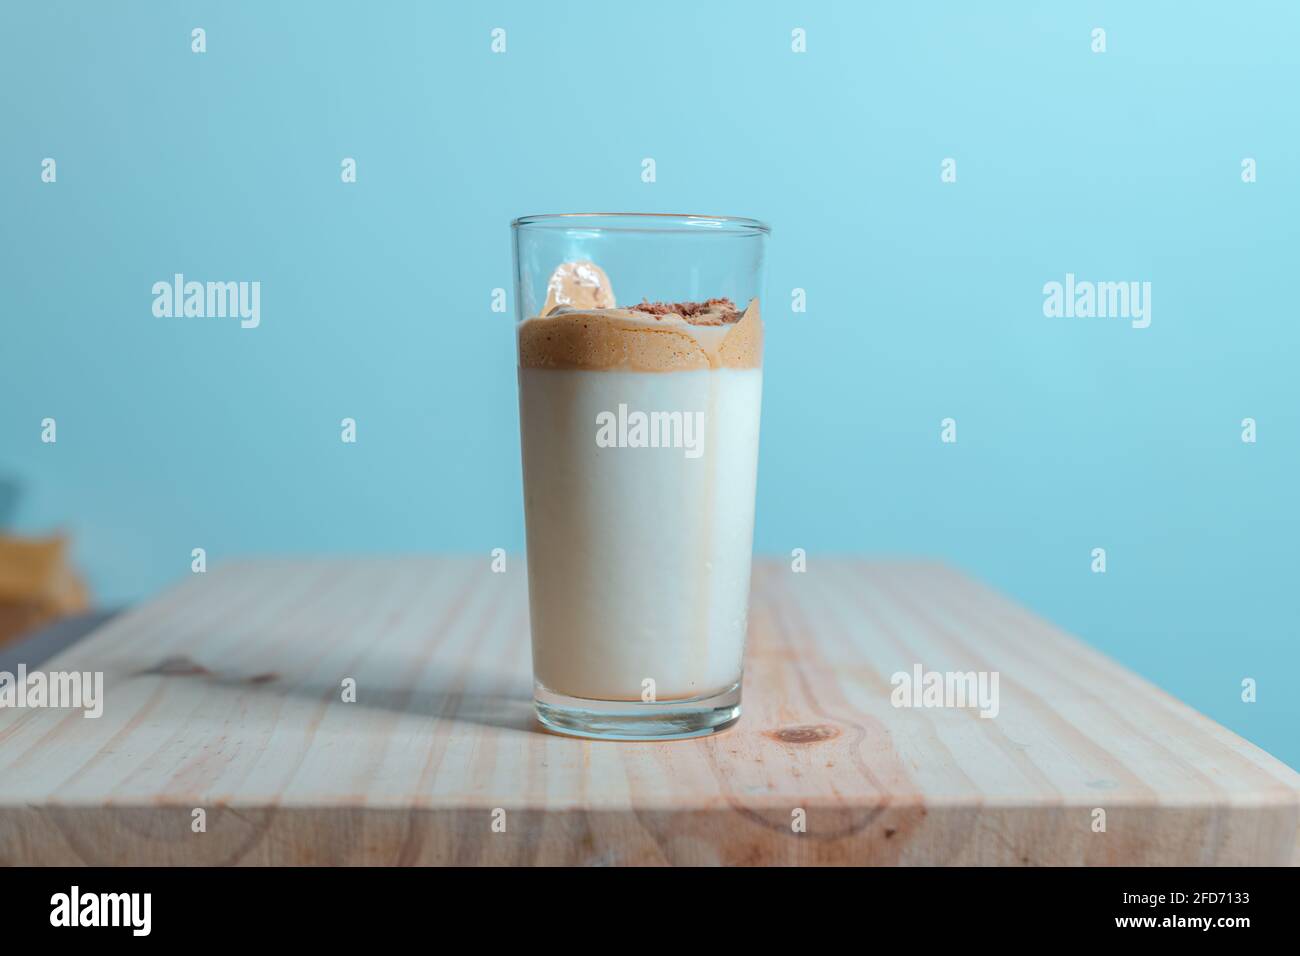 Homemade Dalgona coffee glass in a wooden textured tabletop. whisked instant coffee topping with fresh milk, making the delicious Korean drink. Trendy Stock Photo